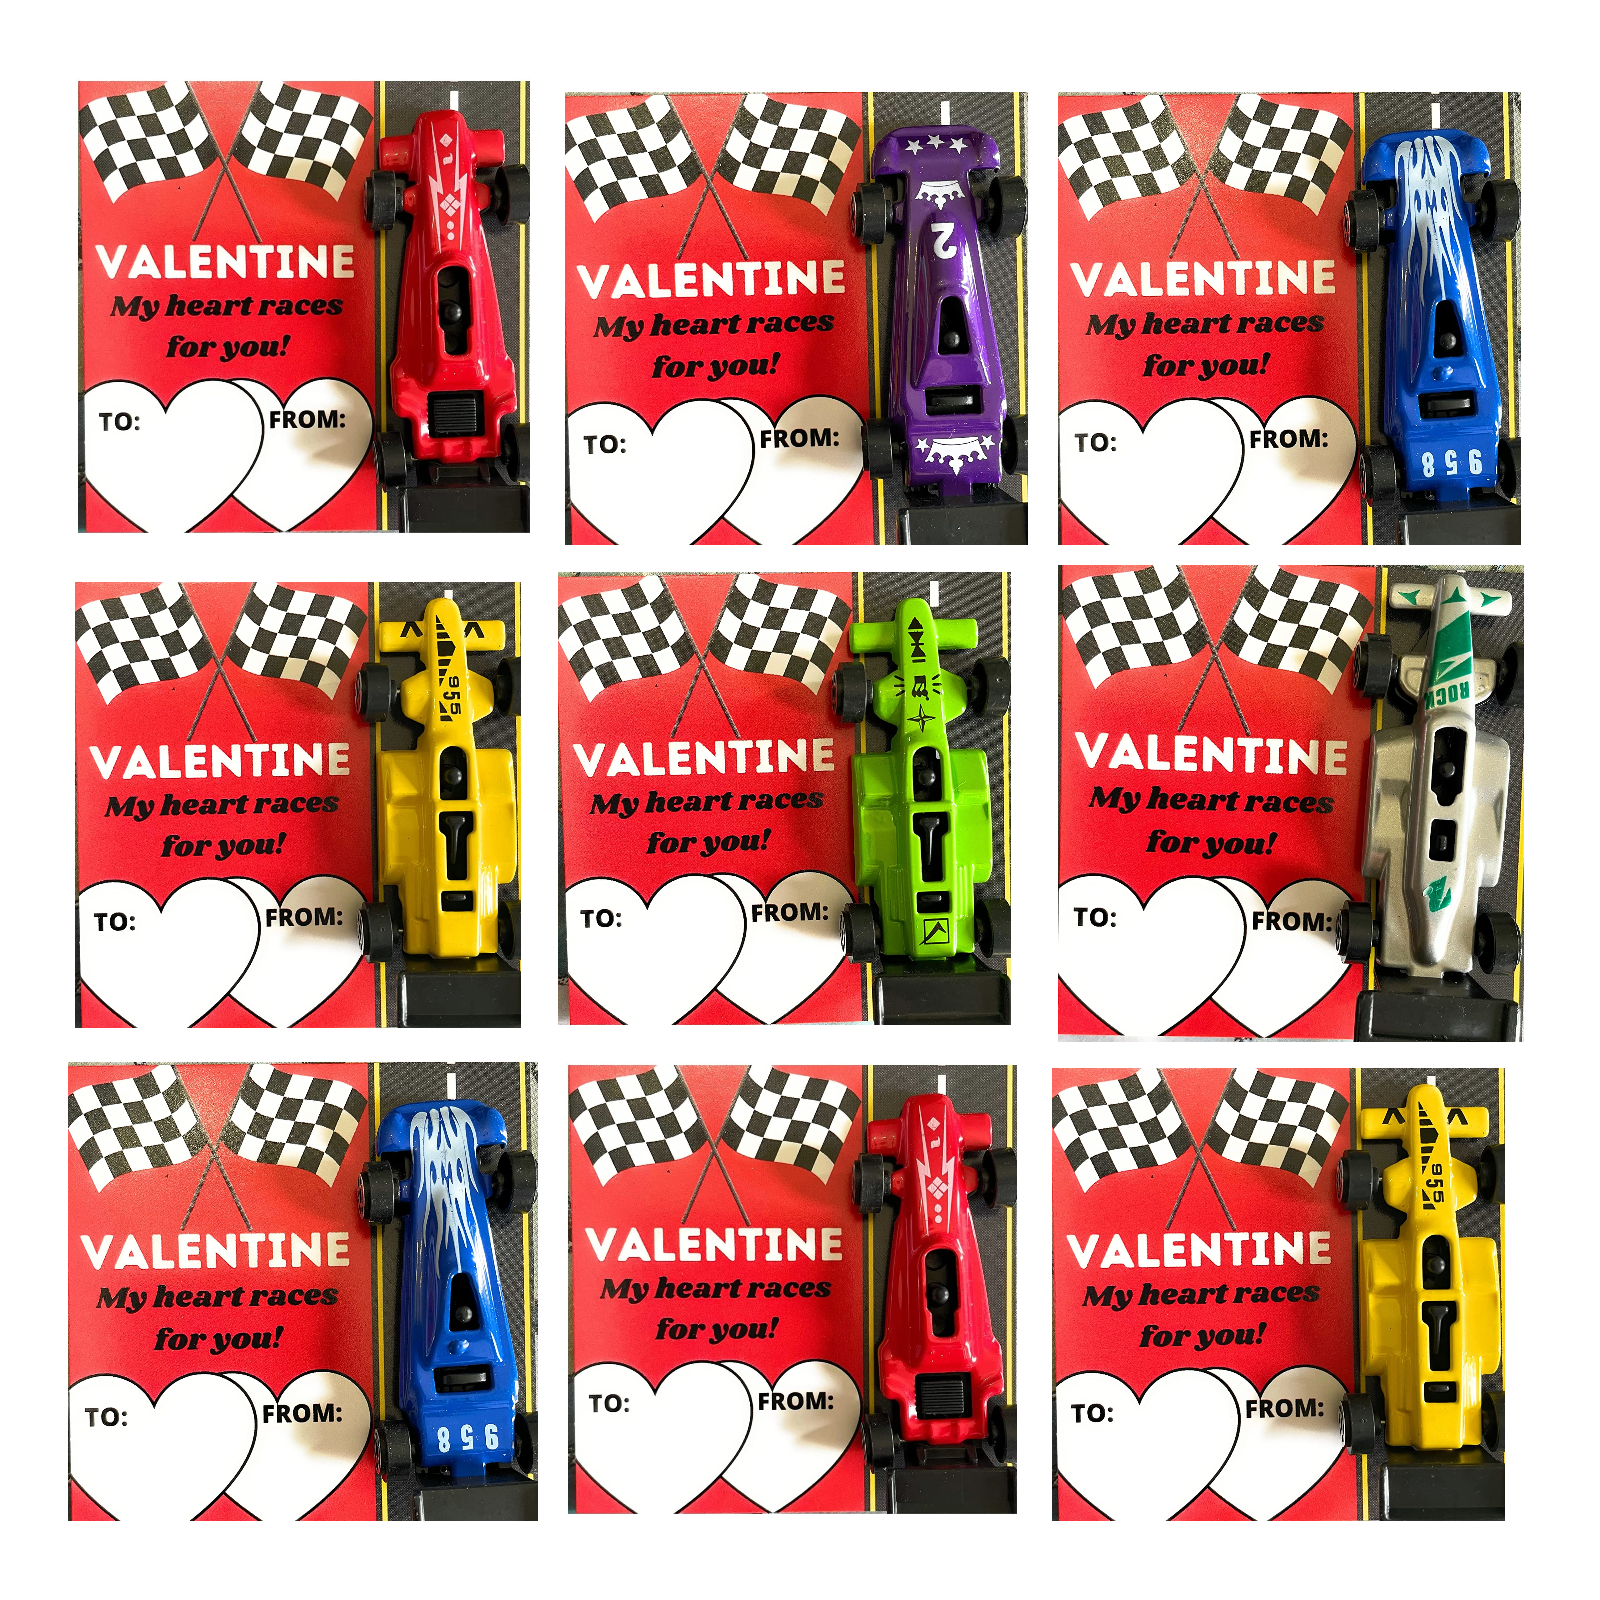 25 My Heart Races For You Valentine Exchange Cards With Metal Cars For Classroom for Kids Party Favor, Classroom Exchange